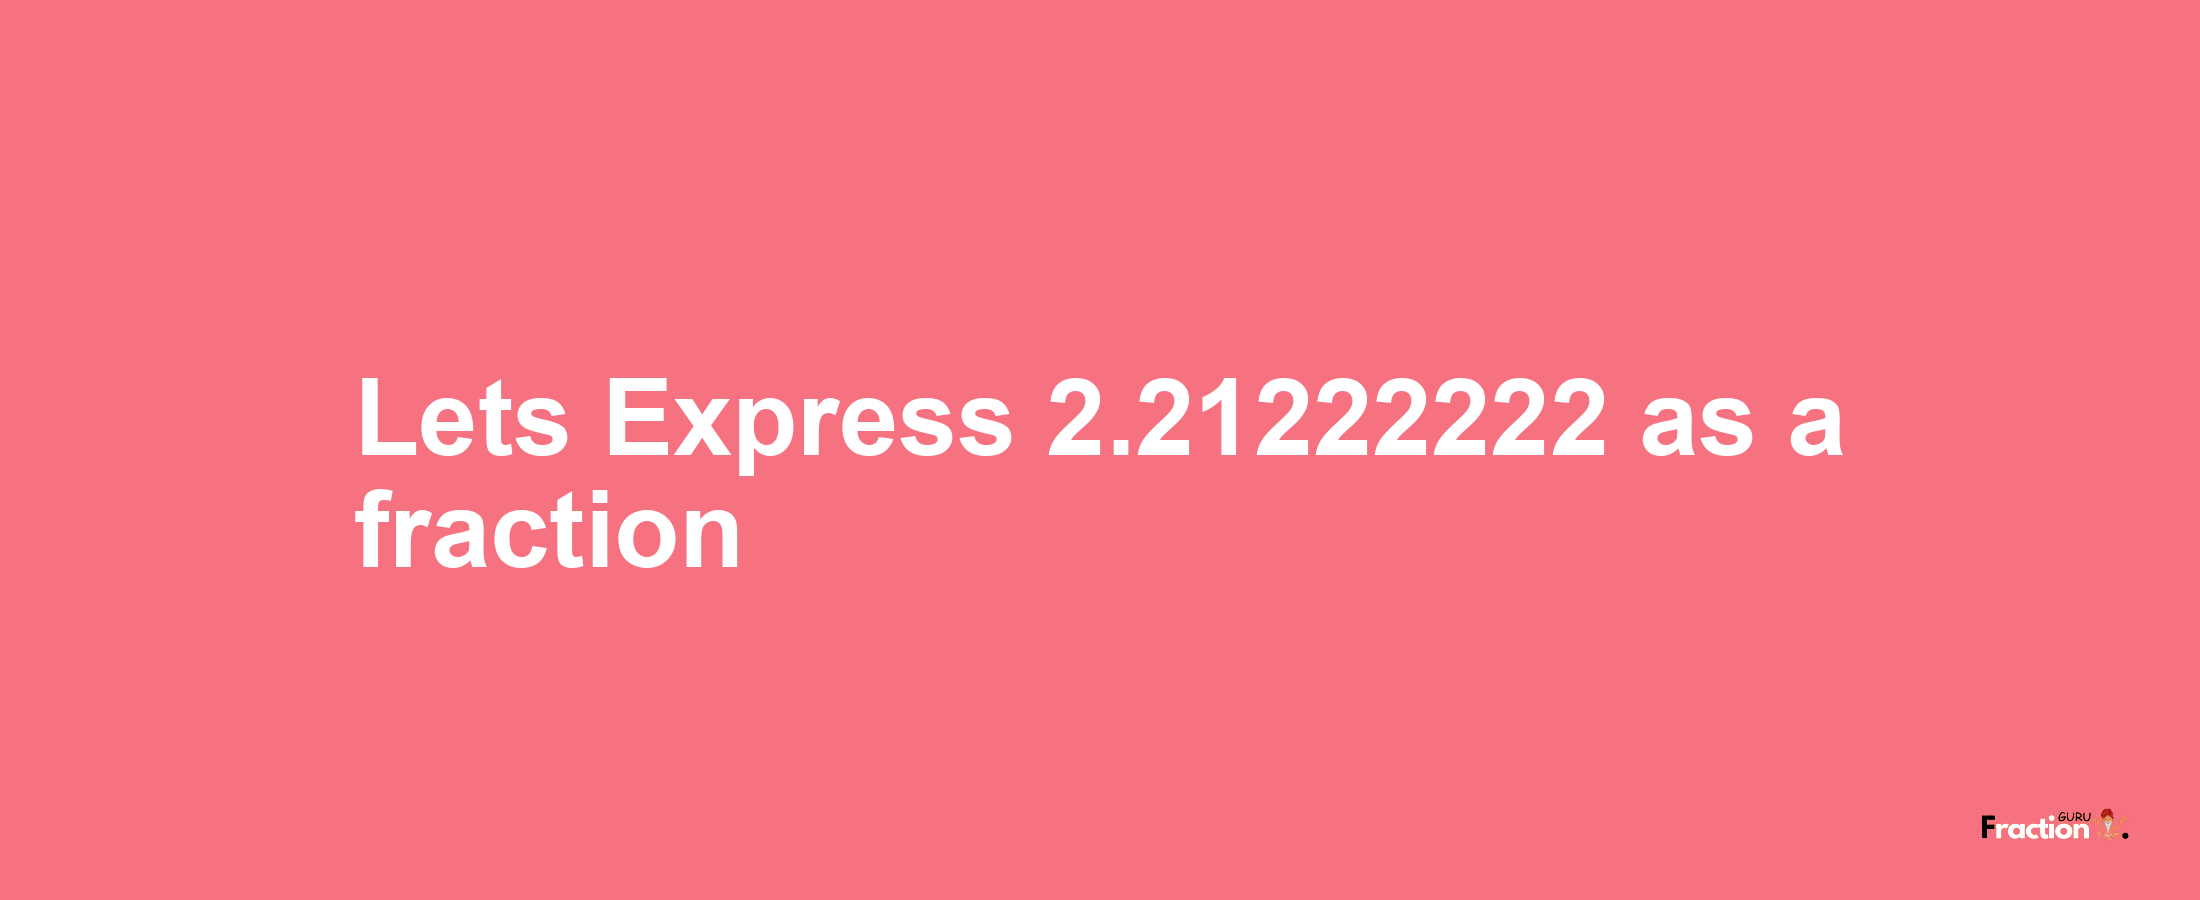 Lets Express 2.21222222 as afraction